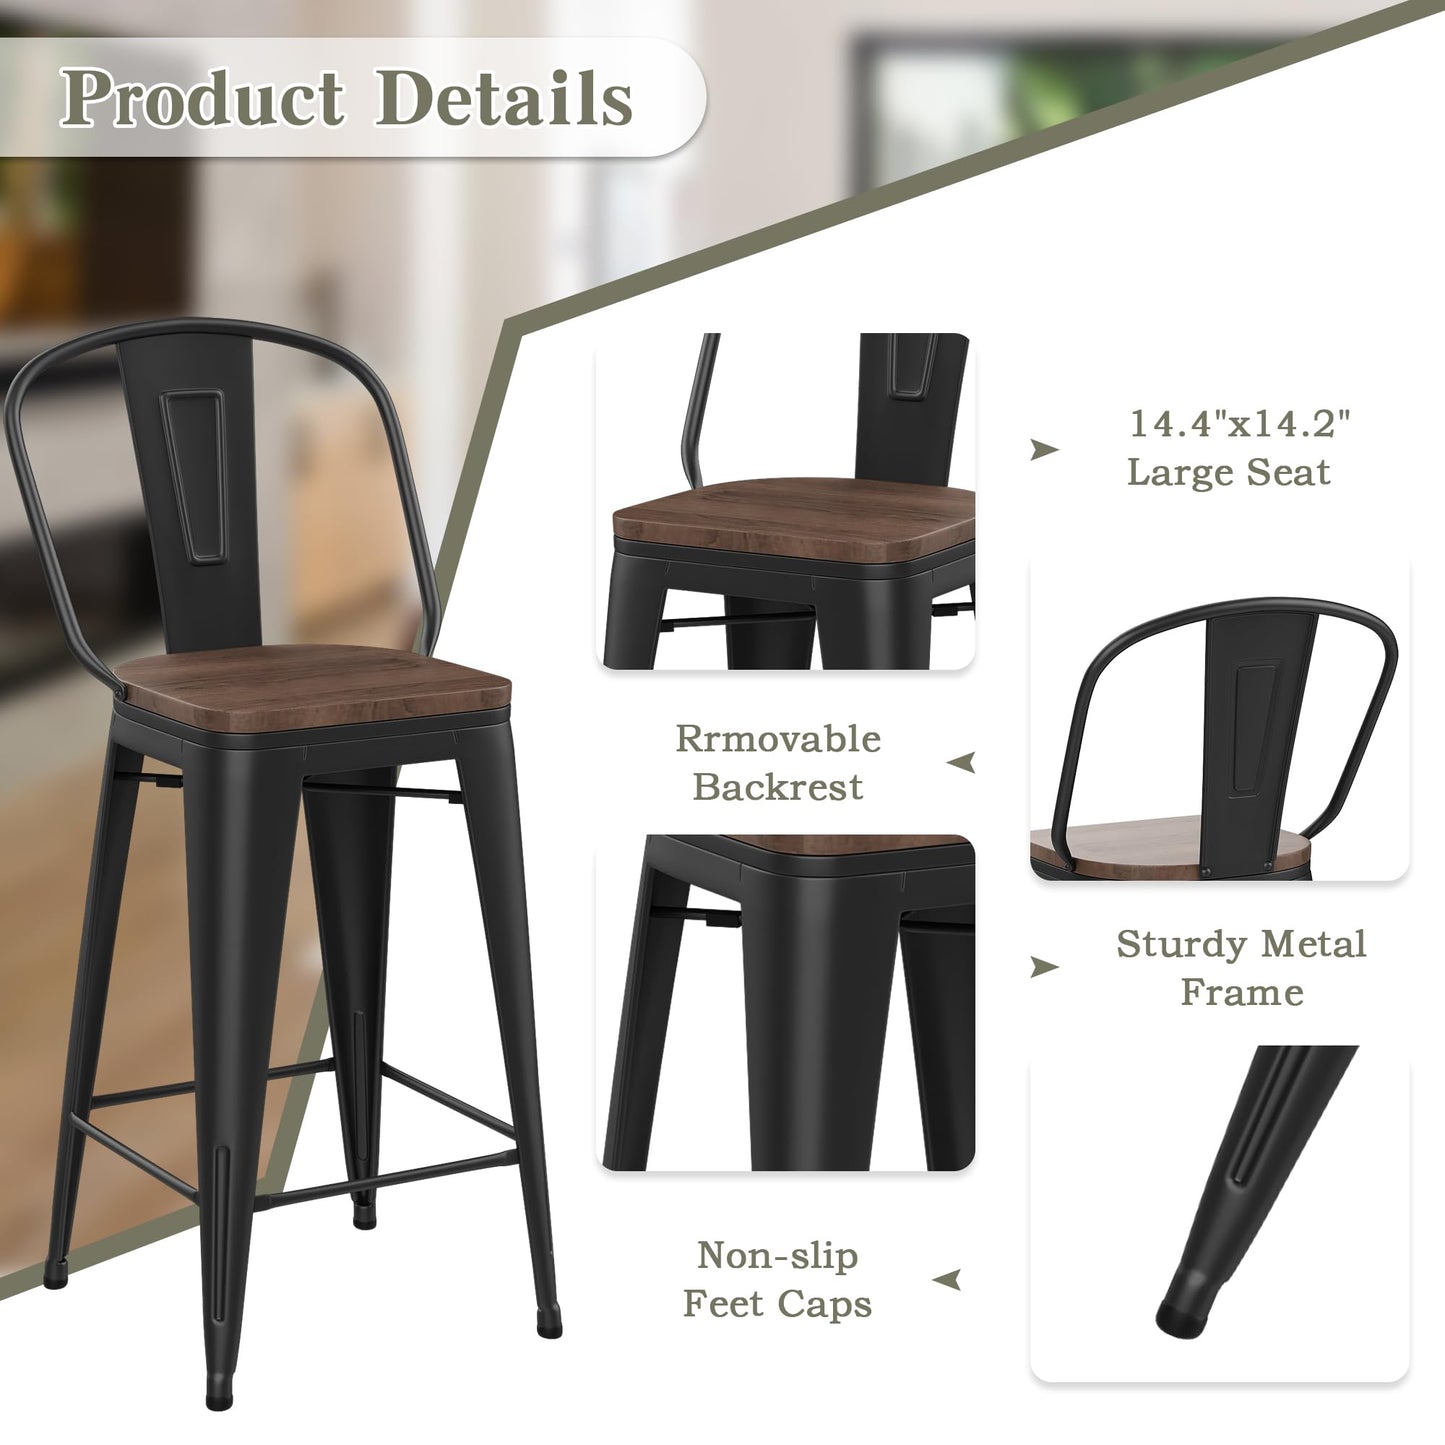 Yongqiang 26 inch Bar Stools Set of 4 High Back Metal Kitchen Counter Height Chairs Barstools with Wooden Seat Industrial Matte Black